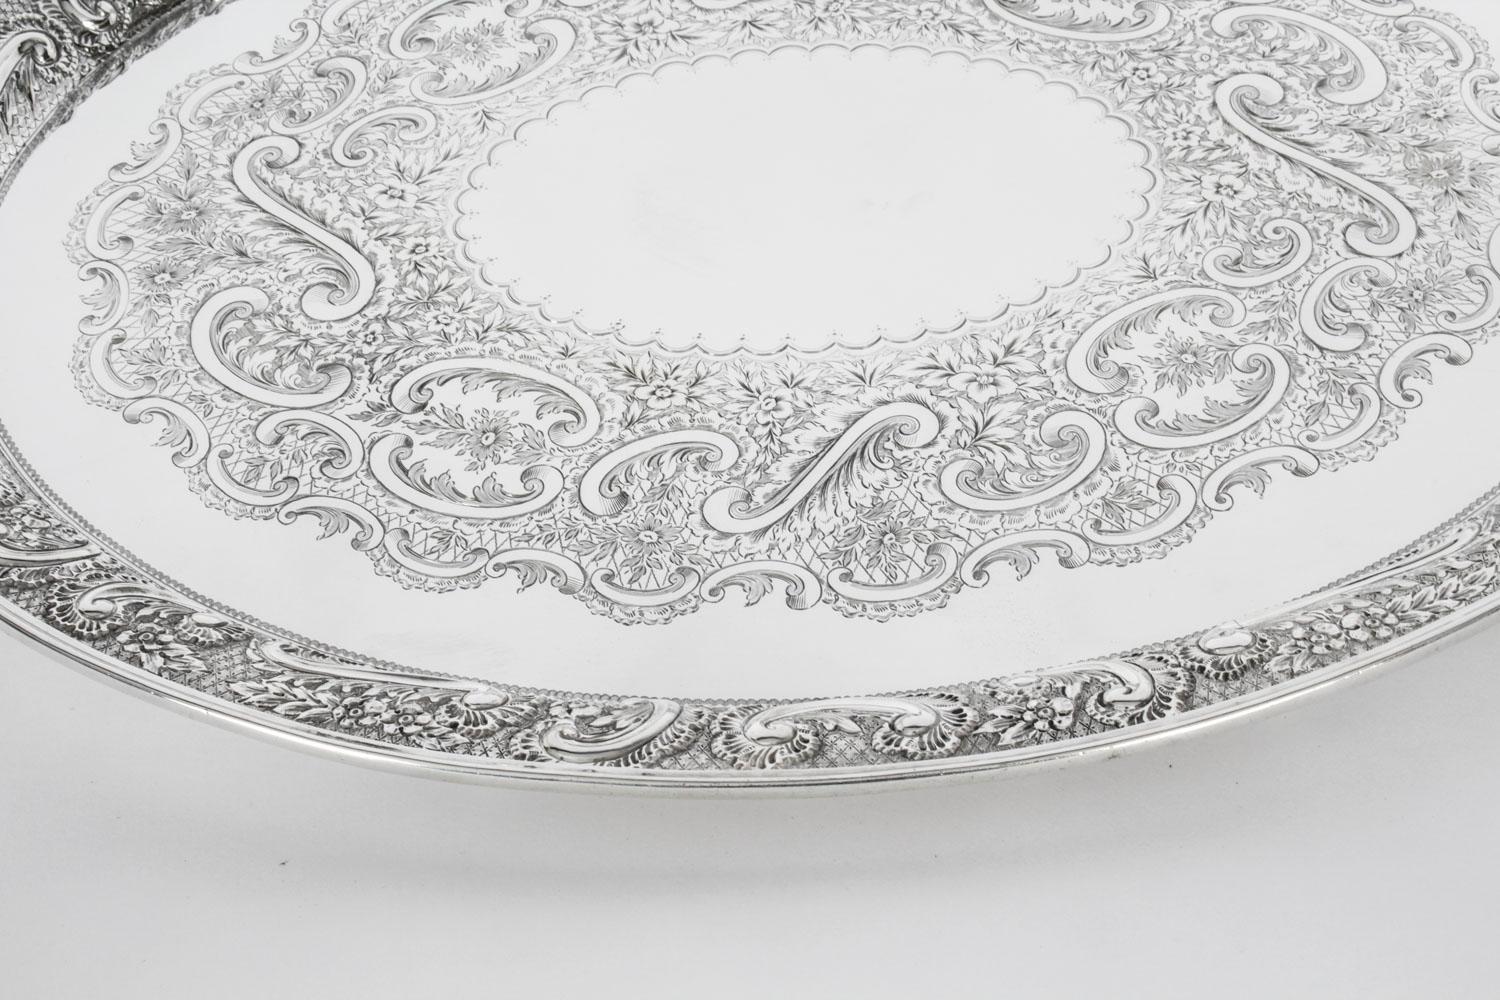 Antique Oval Victorian Silver Plated Tray by Mappin & Webb, 19th Century 6